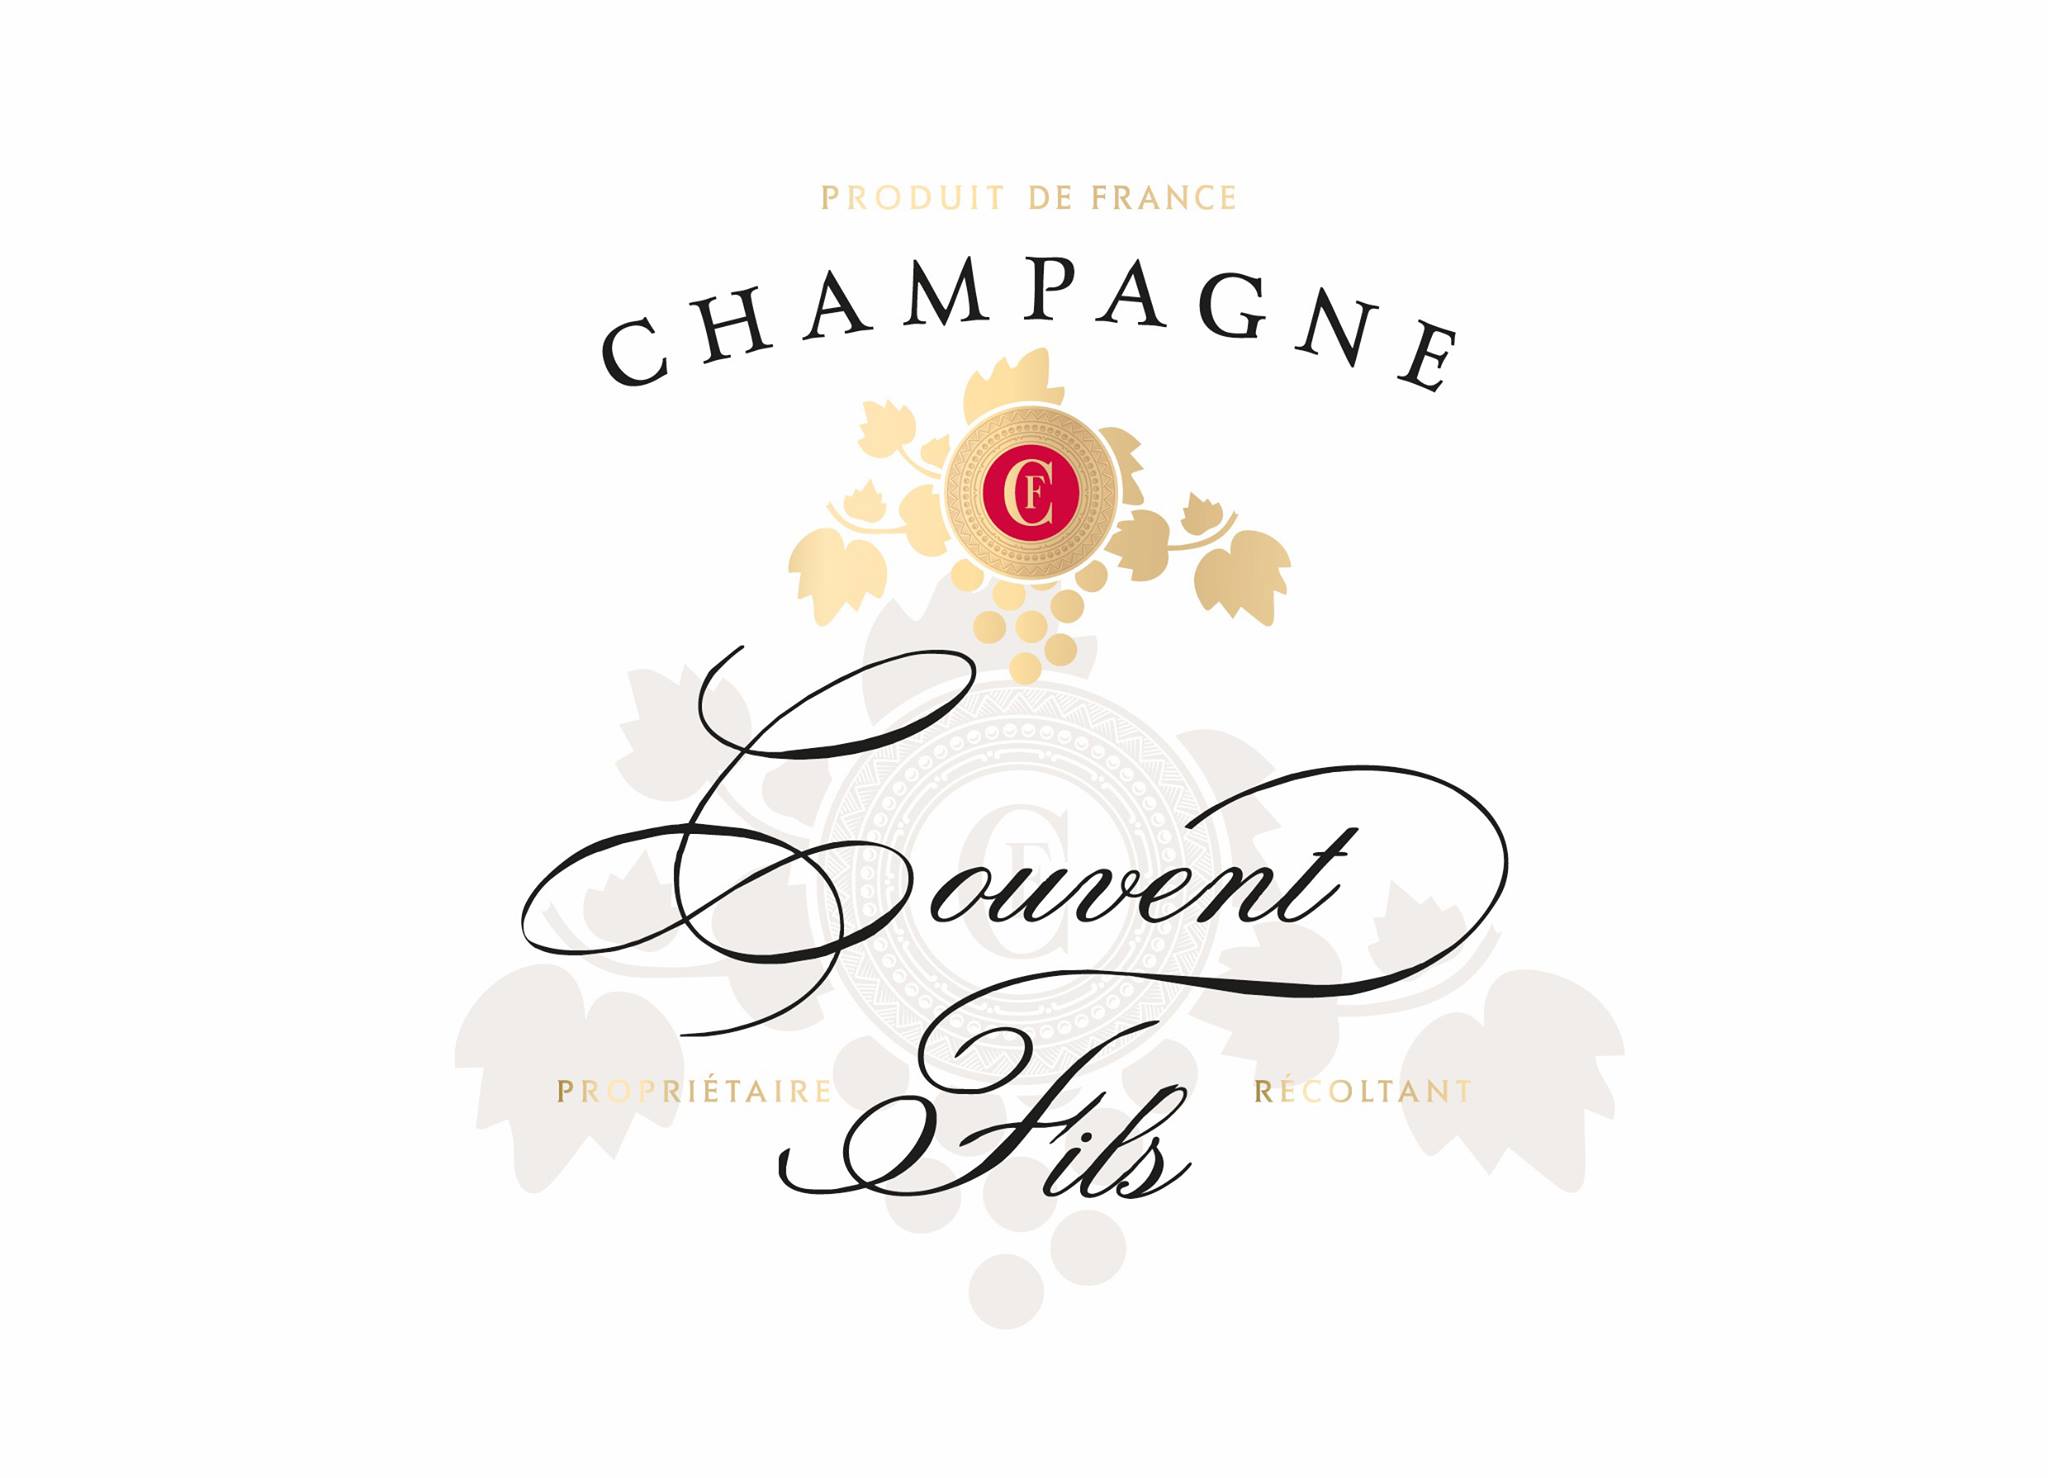 Champagne Couvent Fils